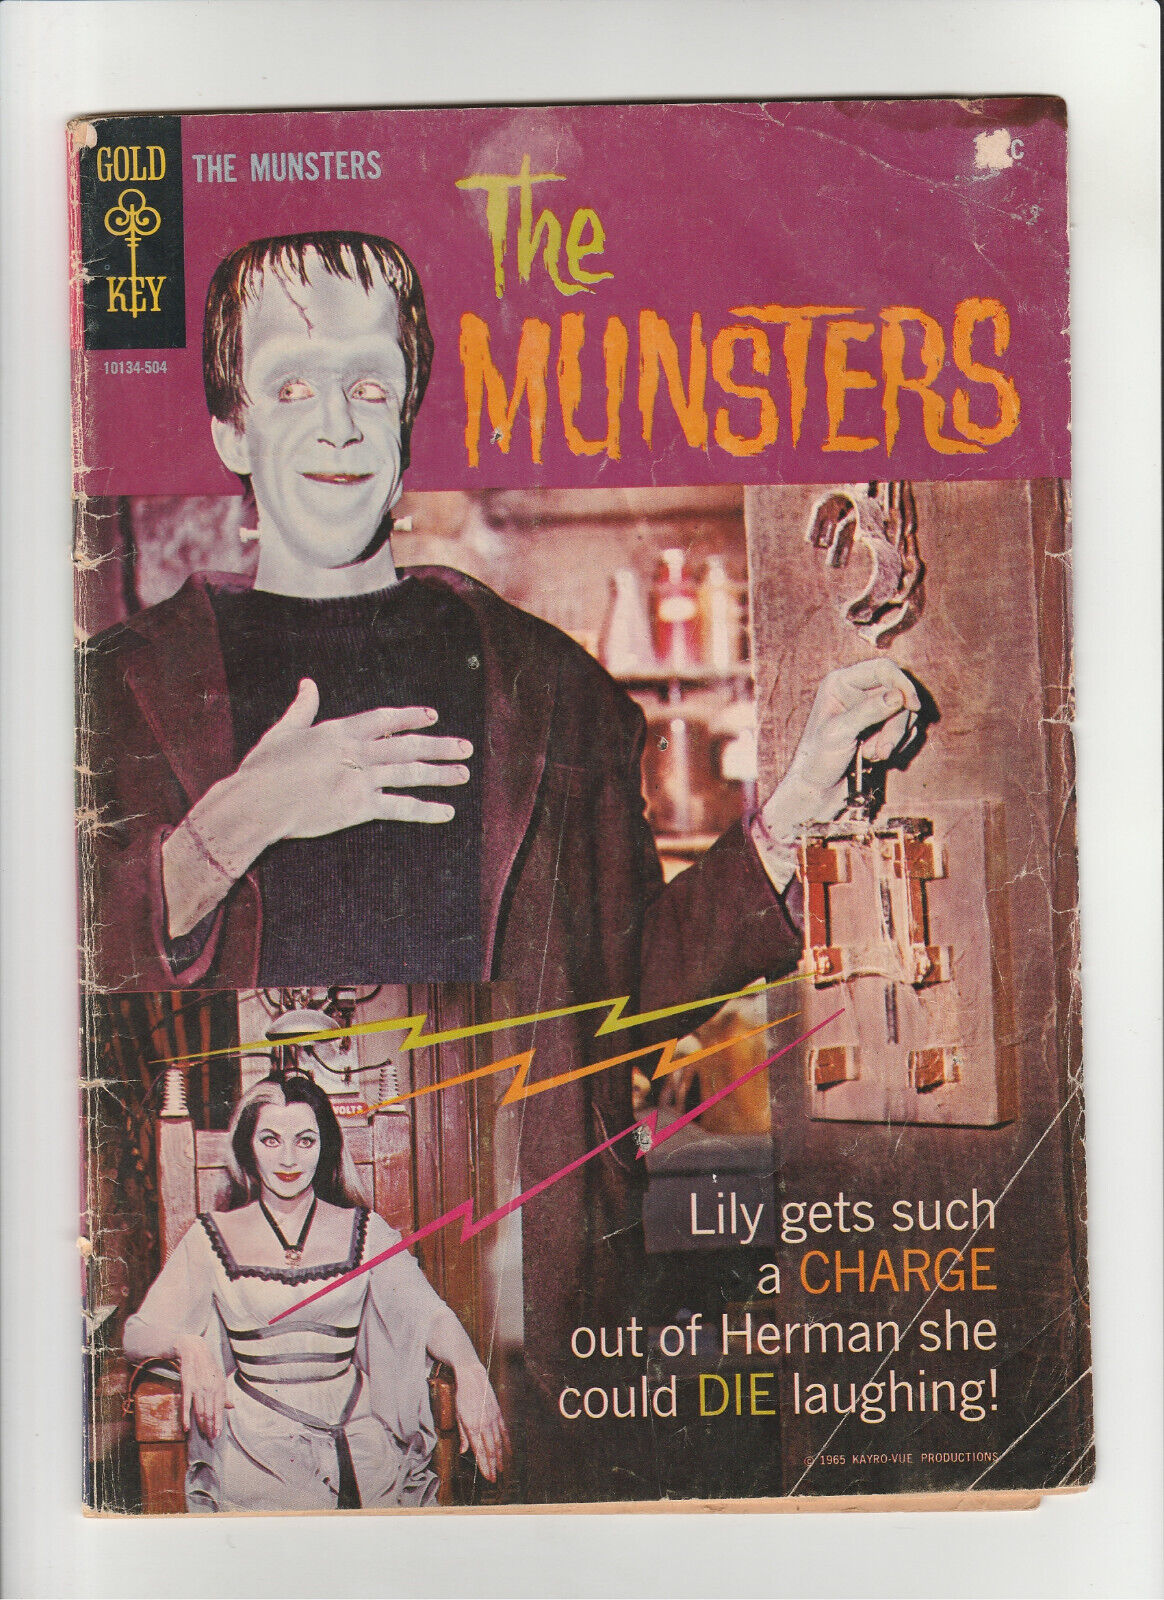 The Munsters #2 1965 Gold Key Comic Book (2.5) Good+ (GD+)